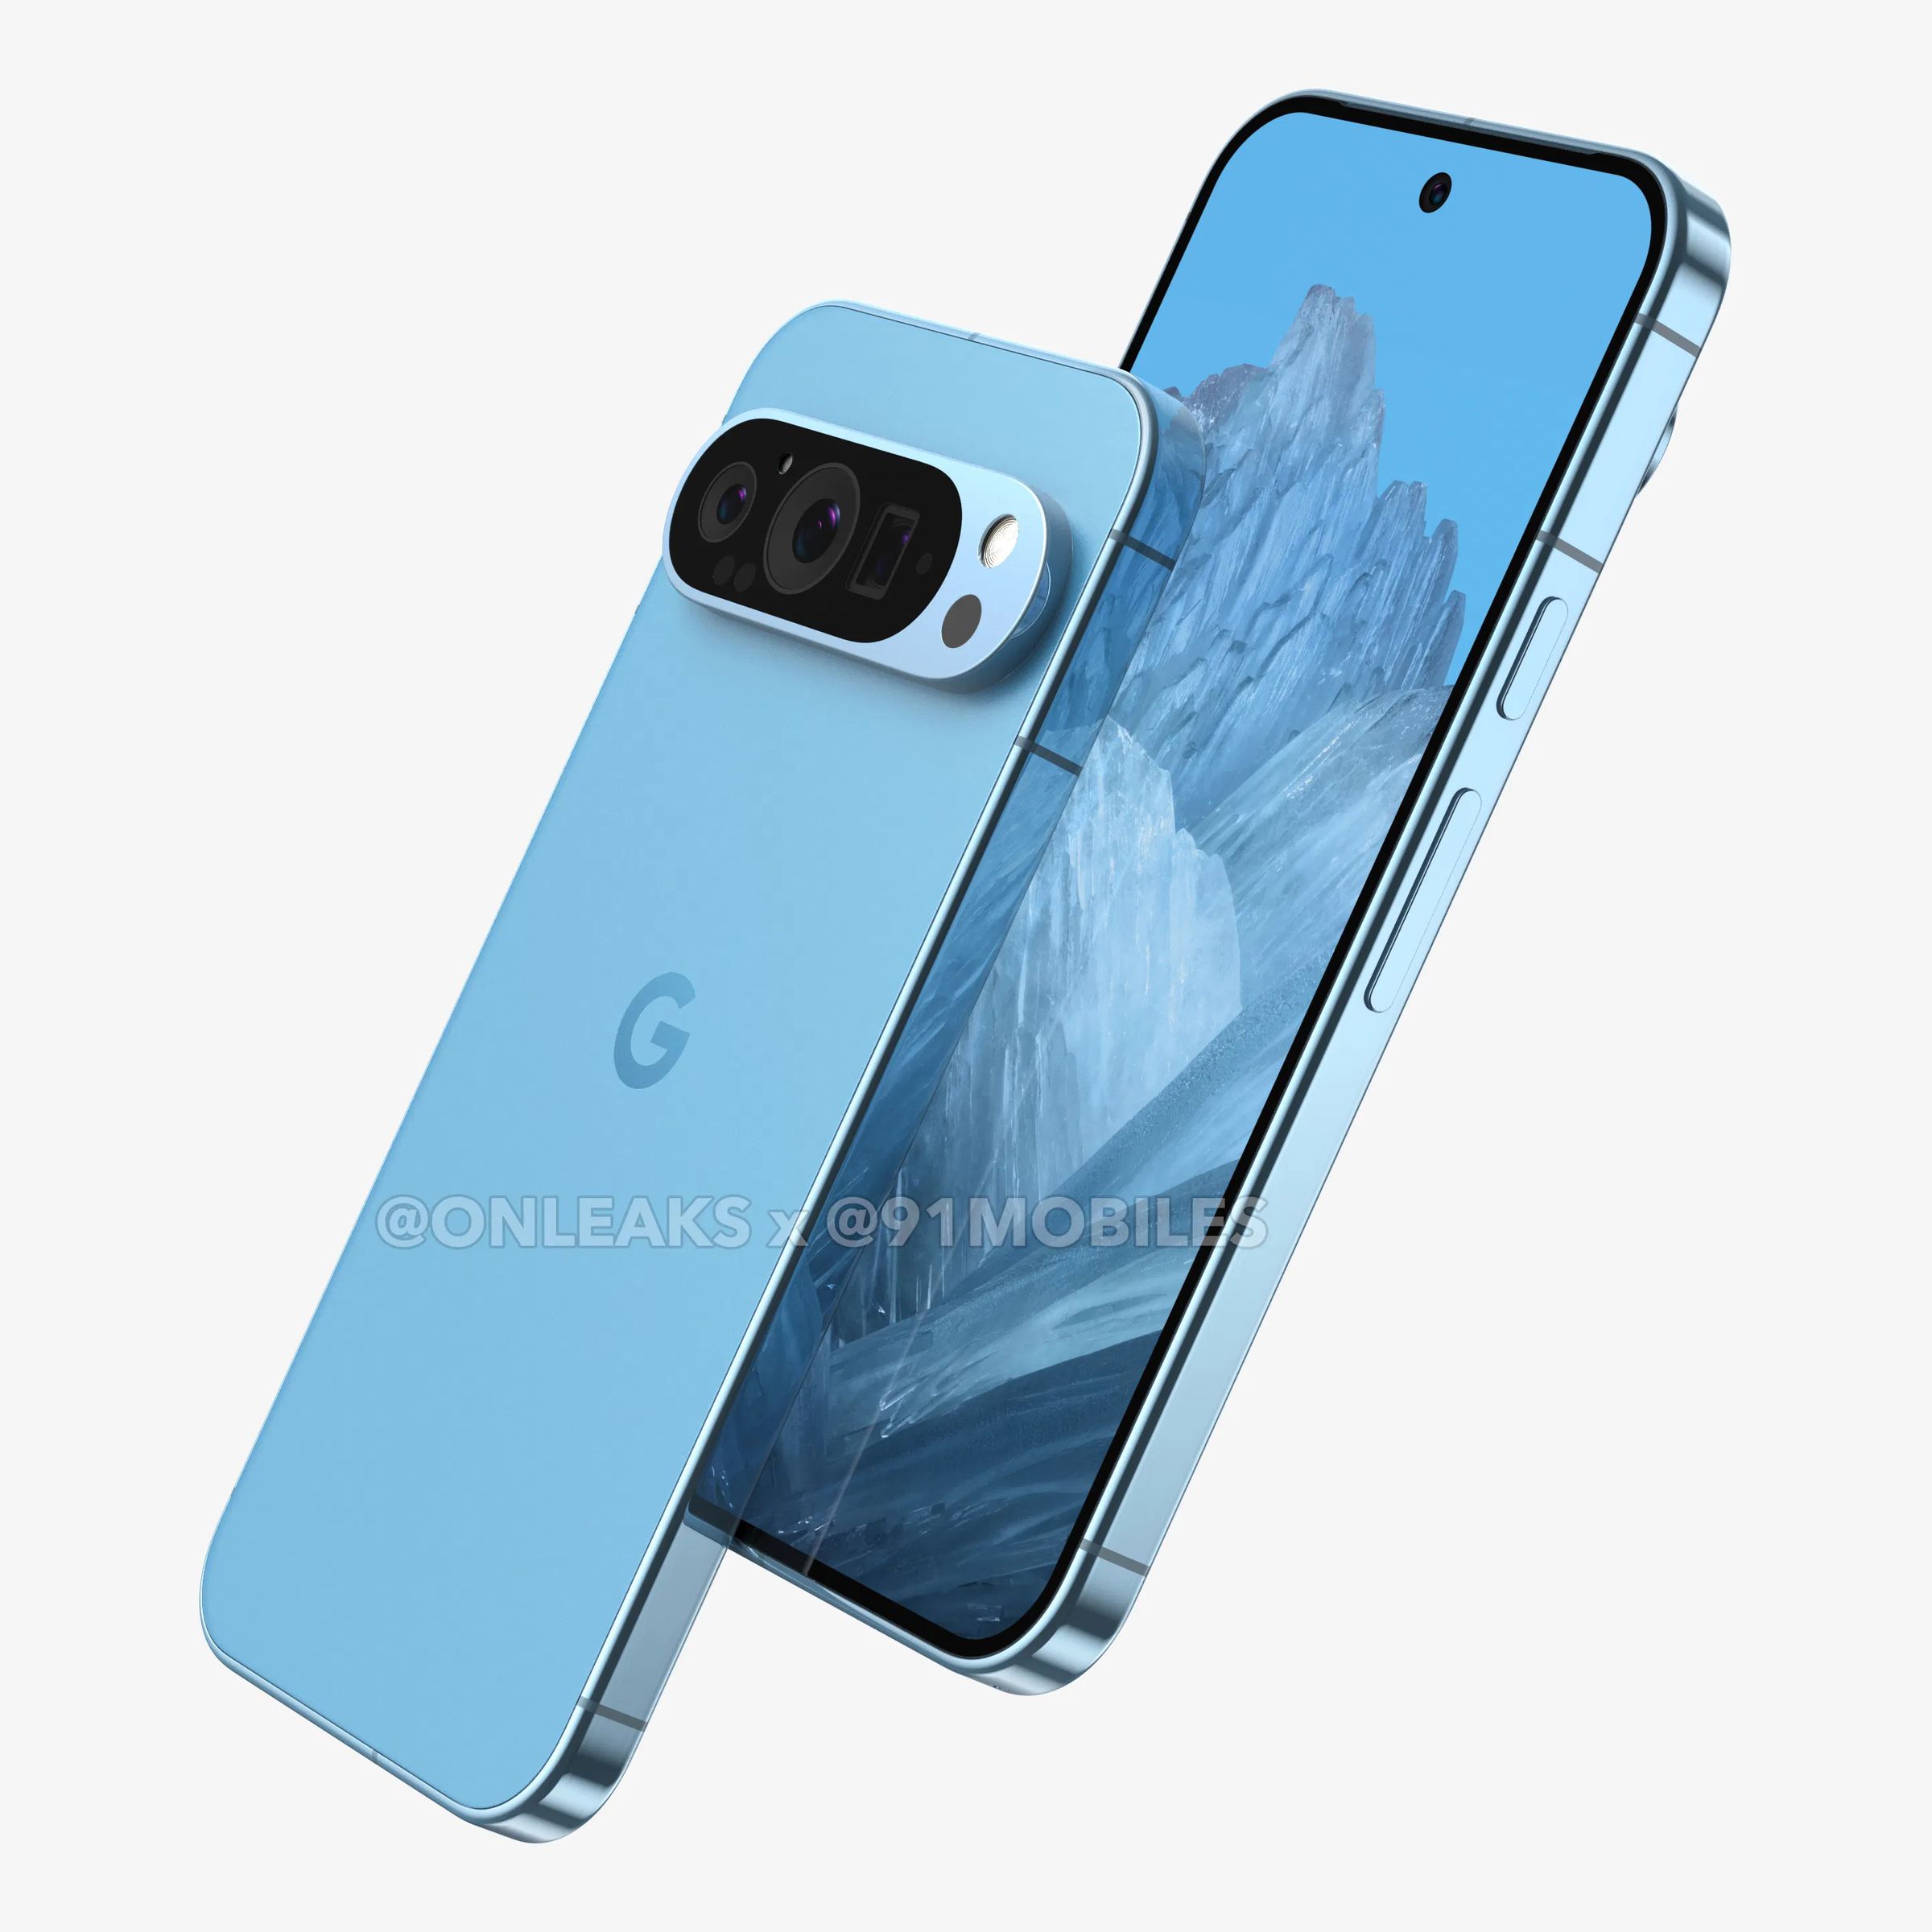 A leaked image showing what appears to be the Google Pixel 9 Pro